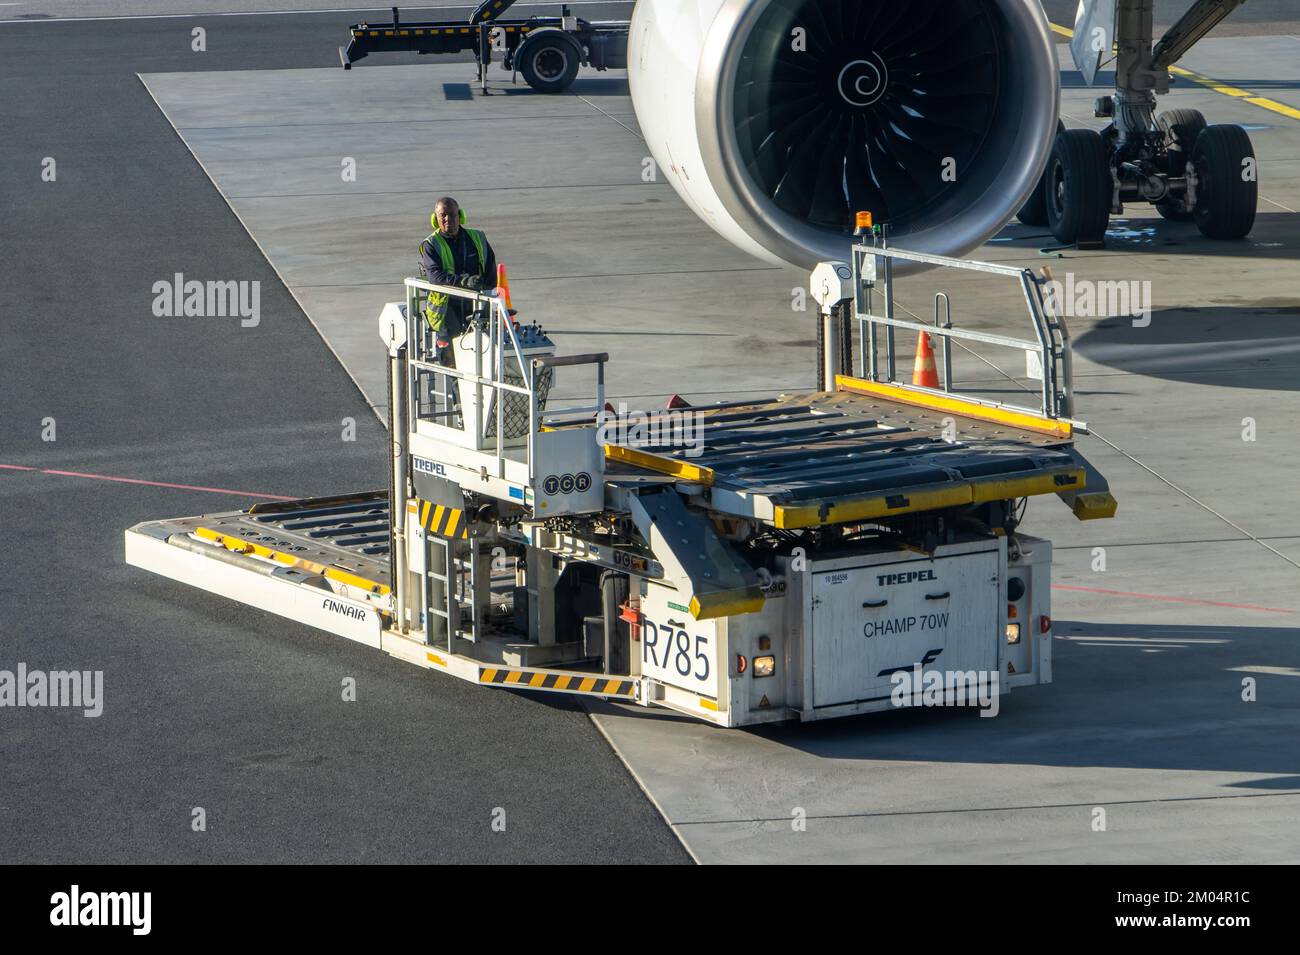 An empty vehicle - cargo high loader rides on a runway, Helsinki, Finland Stock Photo